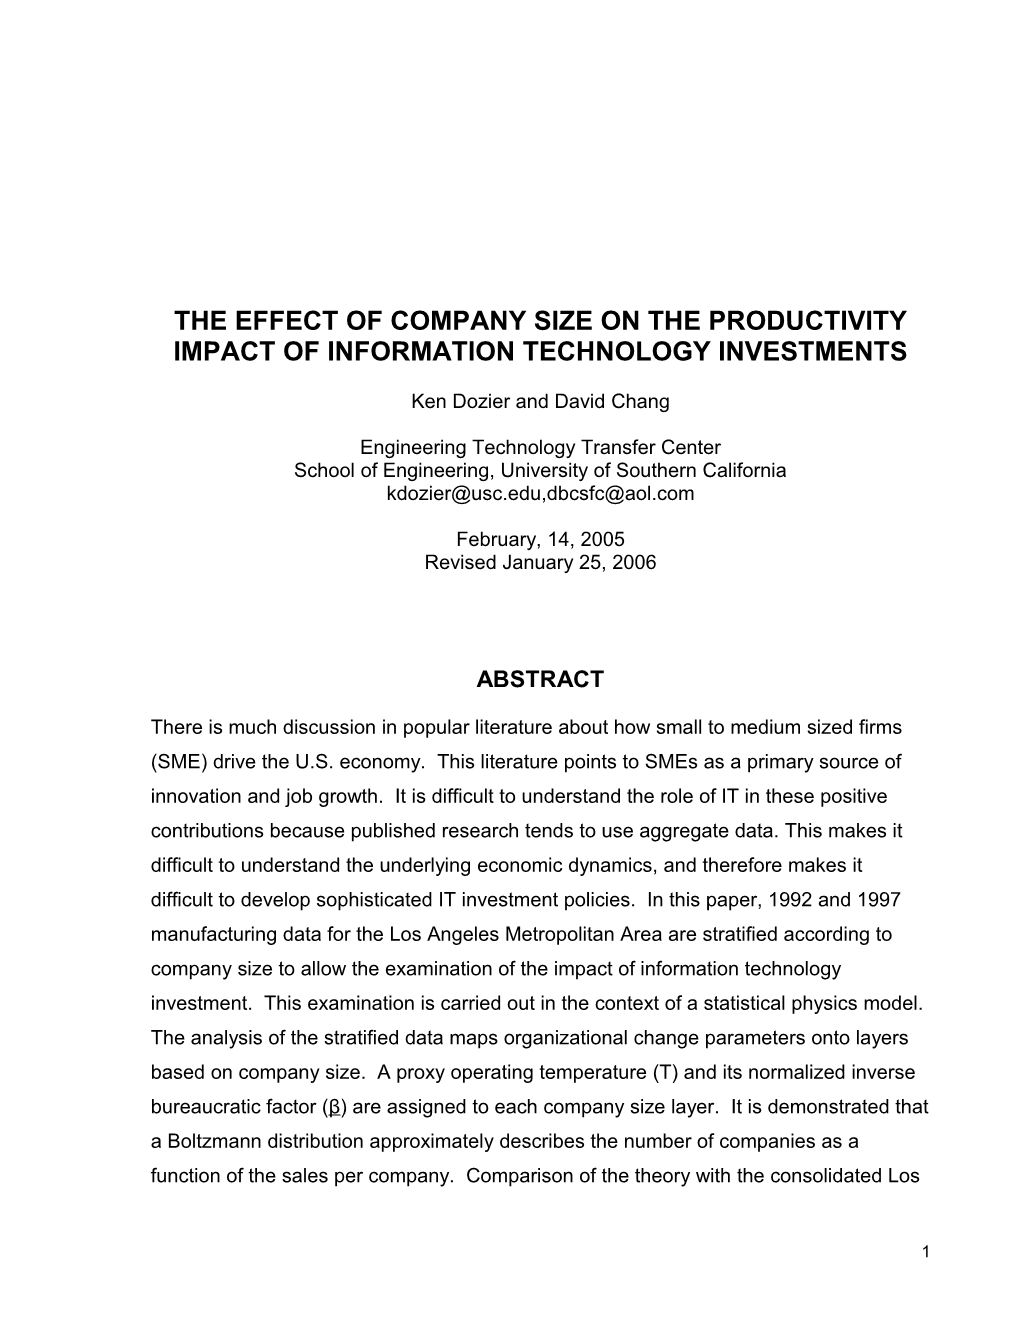 The Effect of Company Size on the Productivity Impact of Information Technology Investments